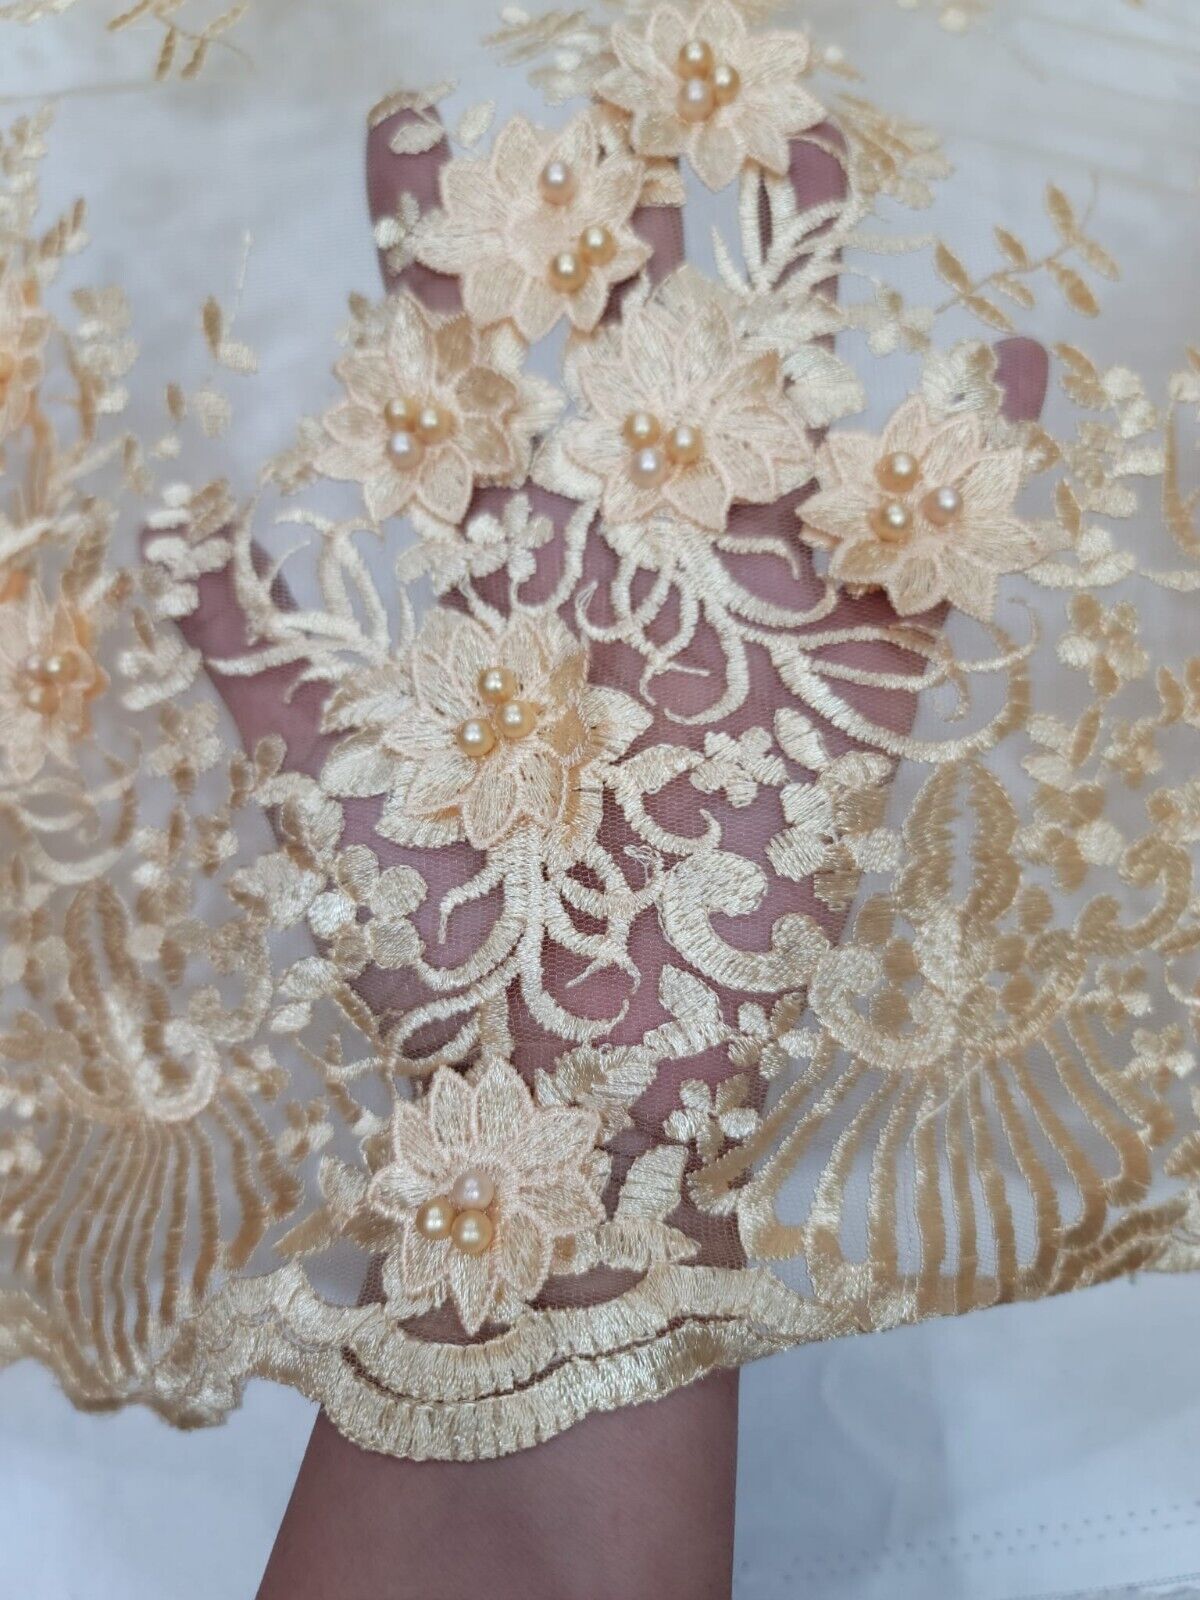 Pale Yellow Beaded Lace 3D Floral Flowers Fabric - Sold By The Yard - Ideal for Gown and Quinceañera Dresses (52” Width)